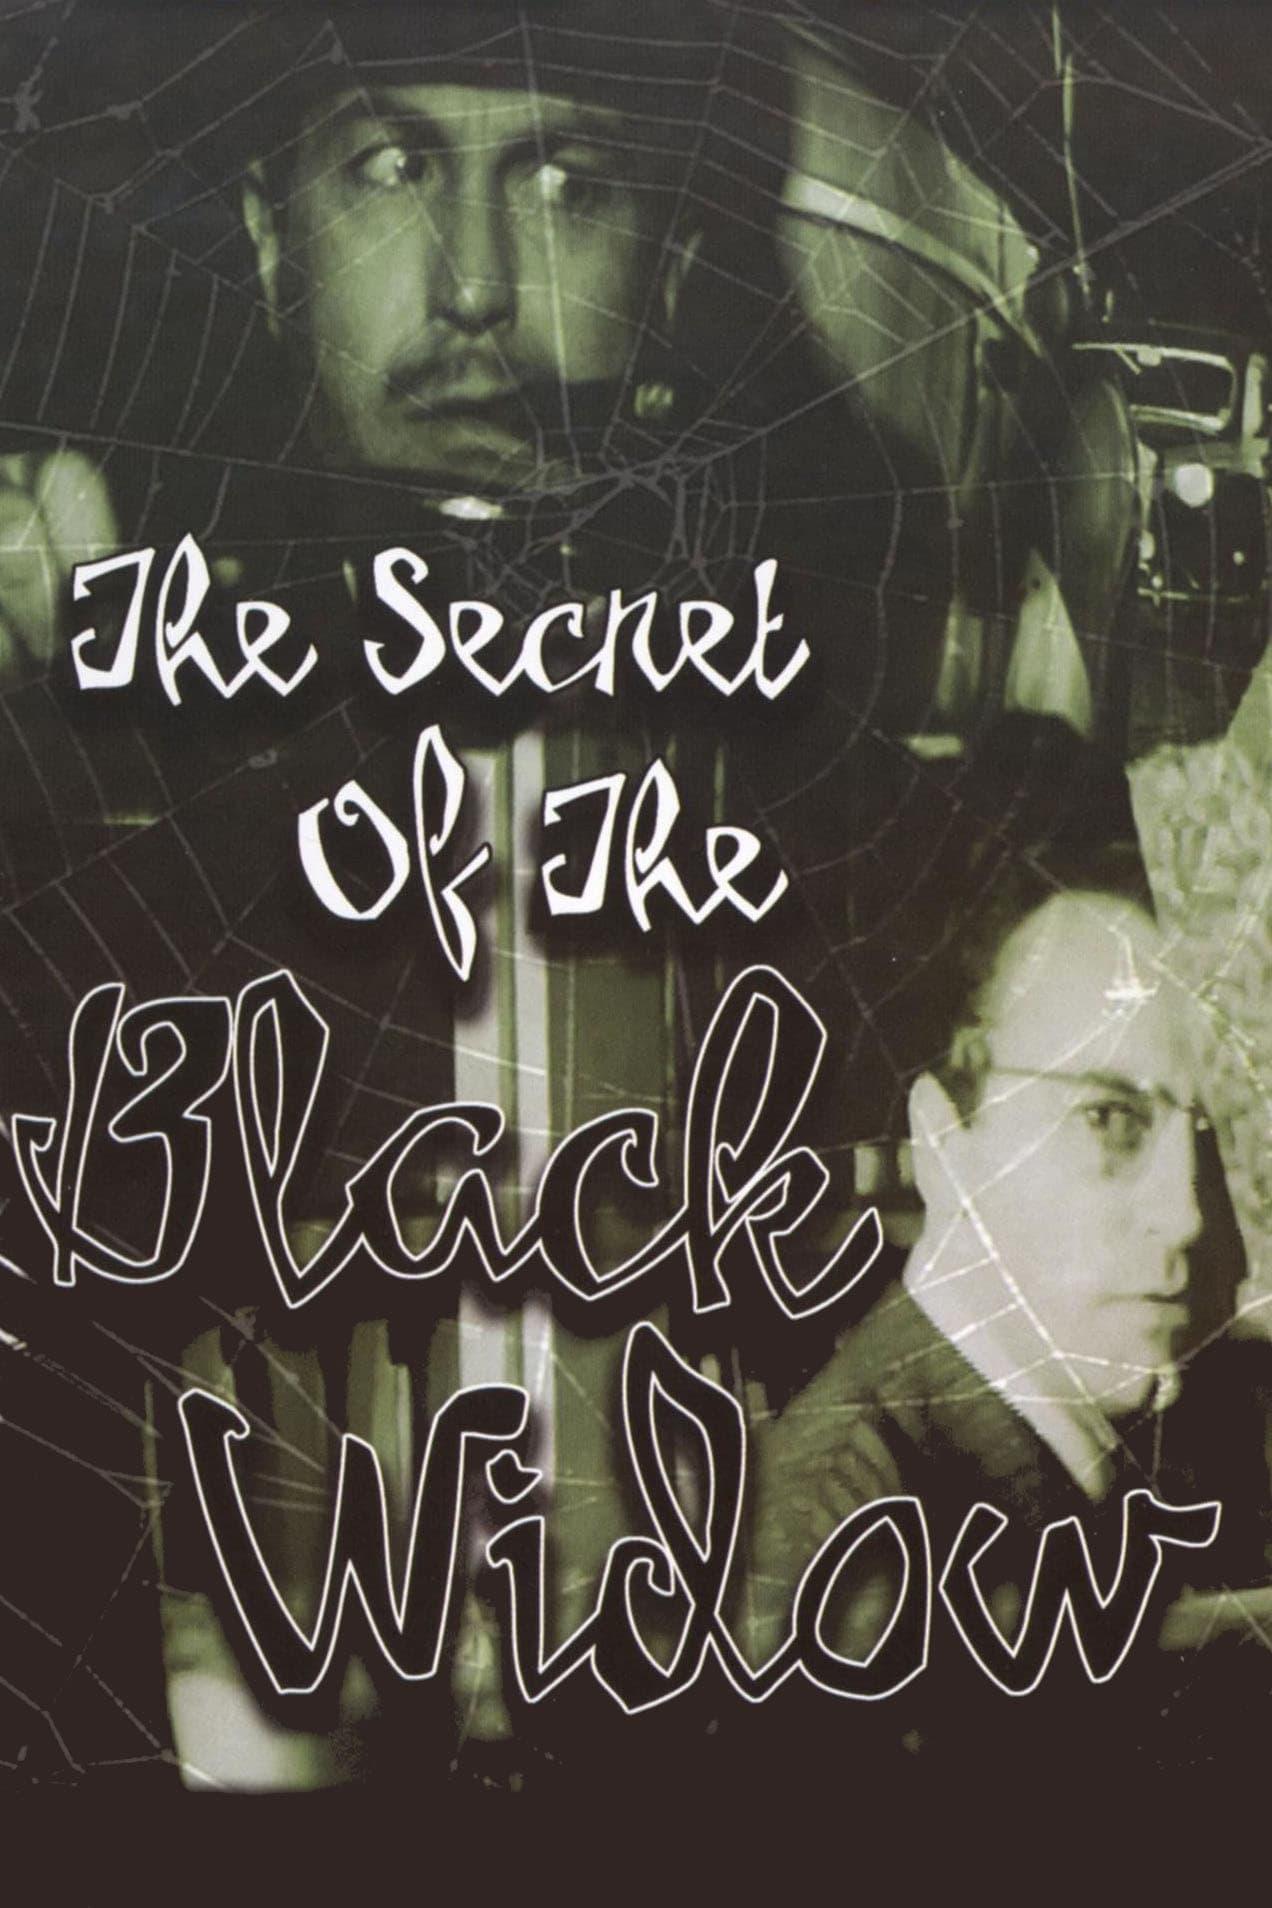 The Secret of the Black Widow poster